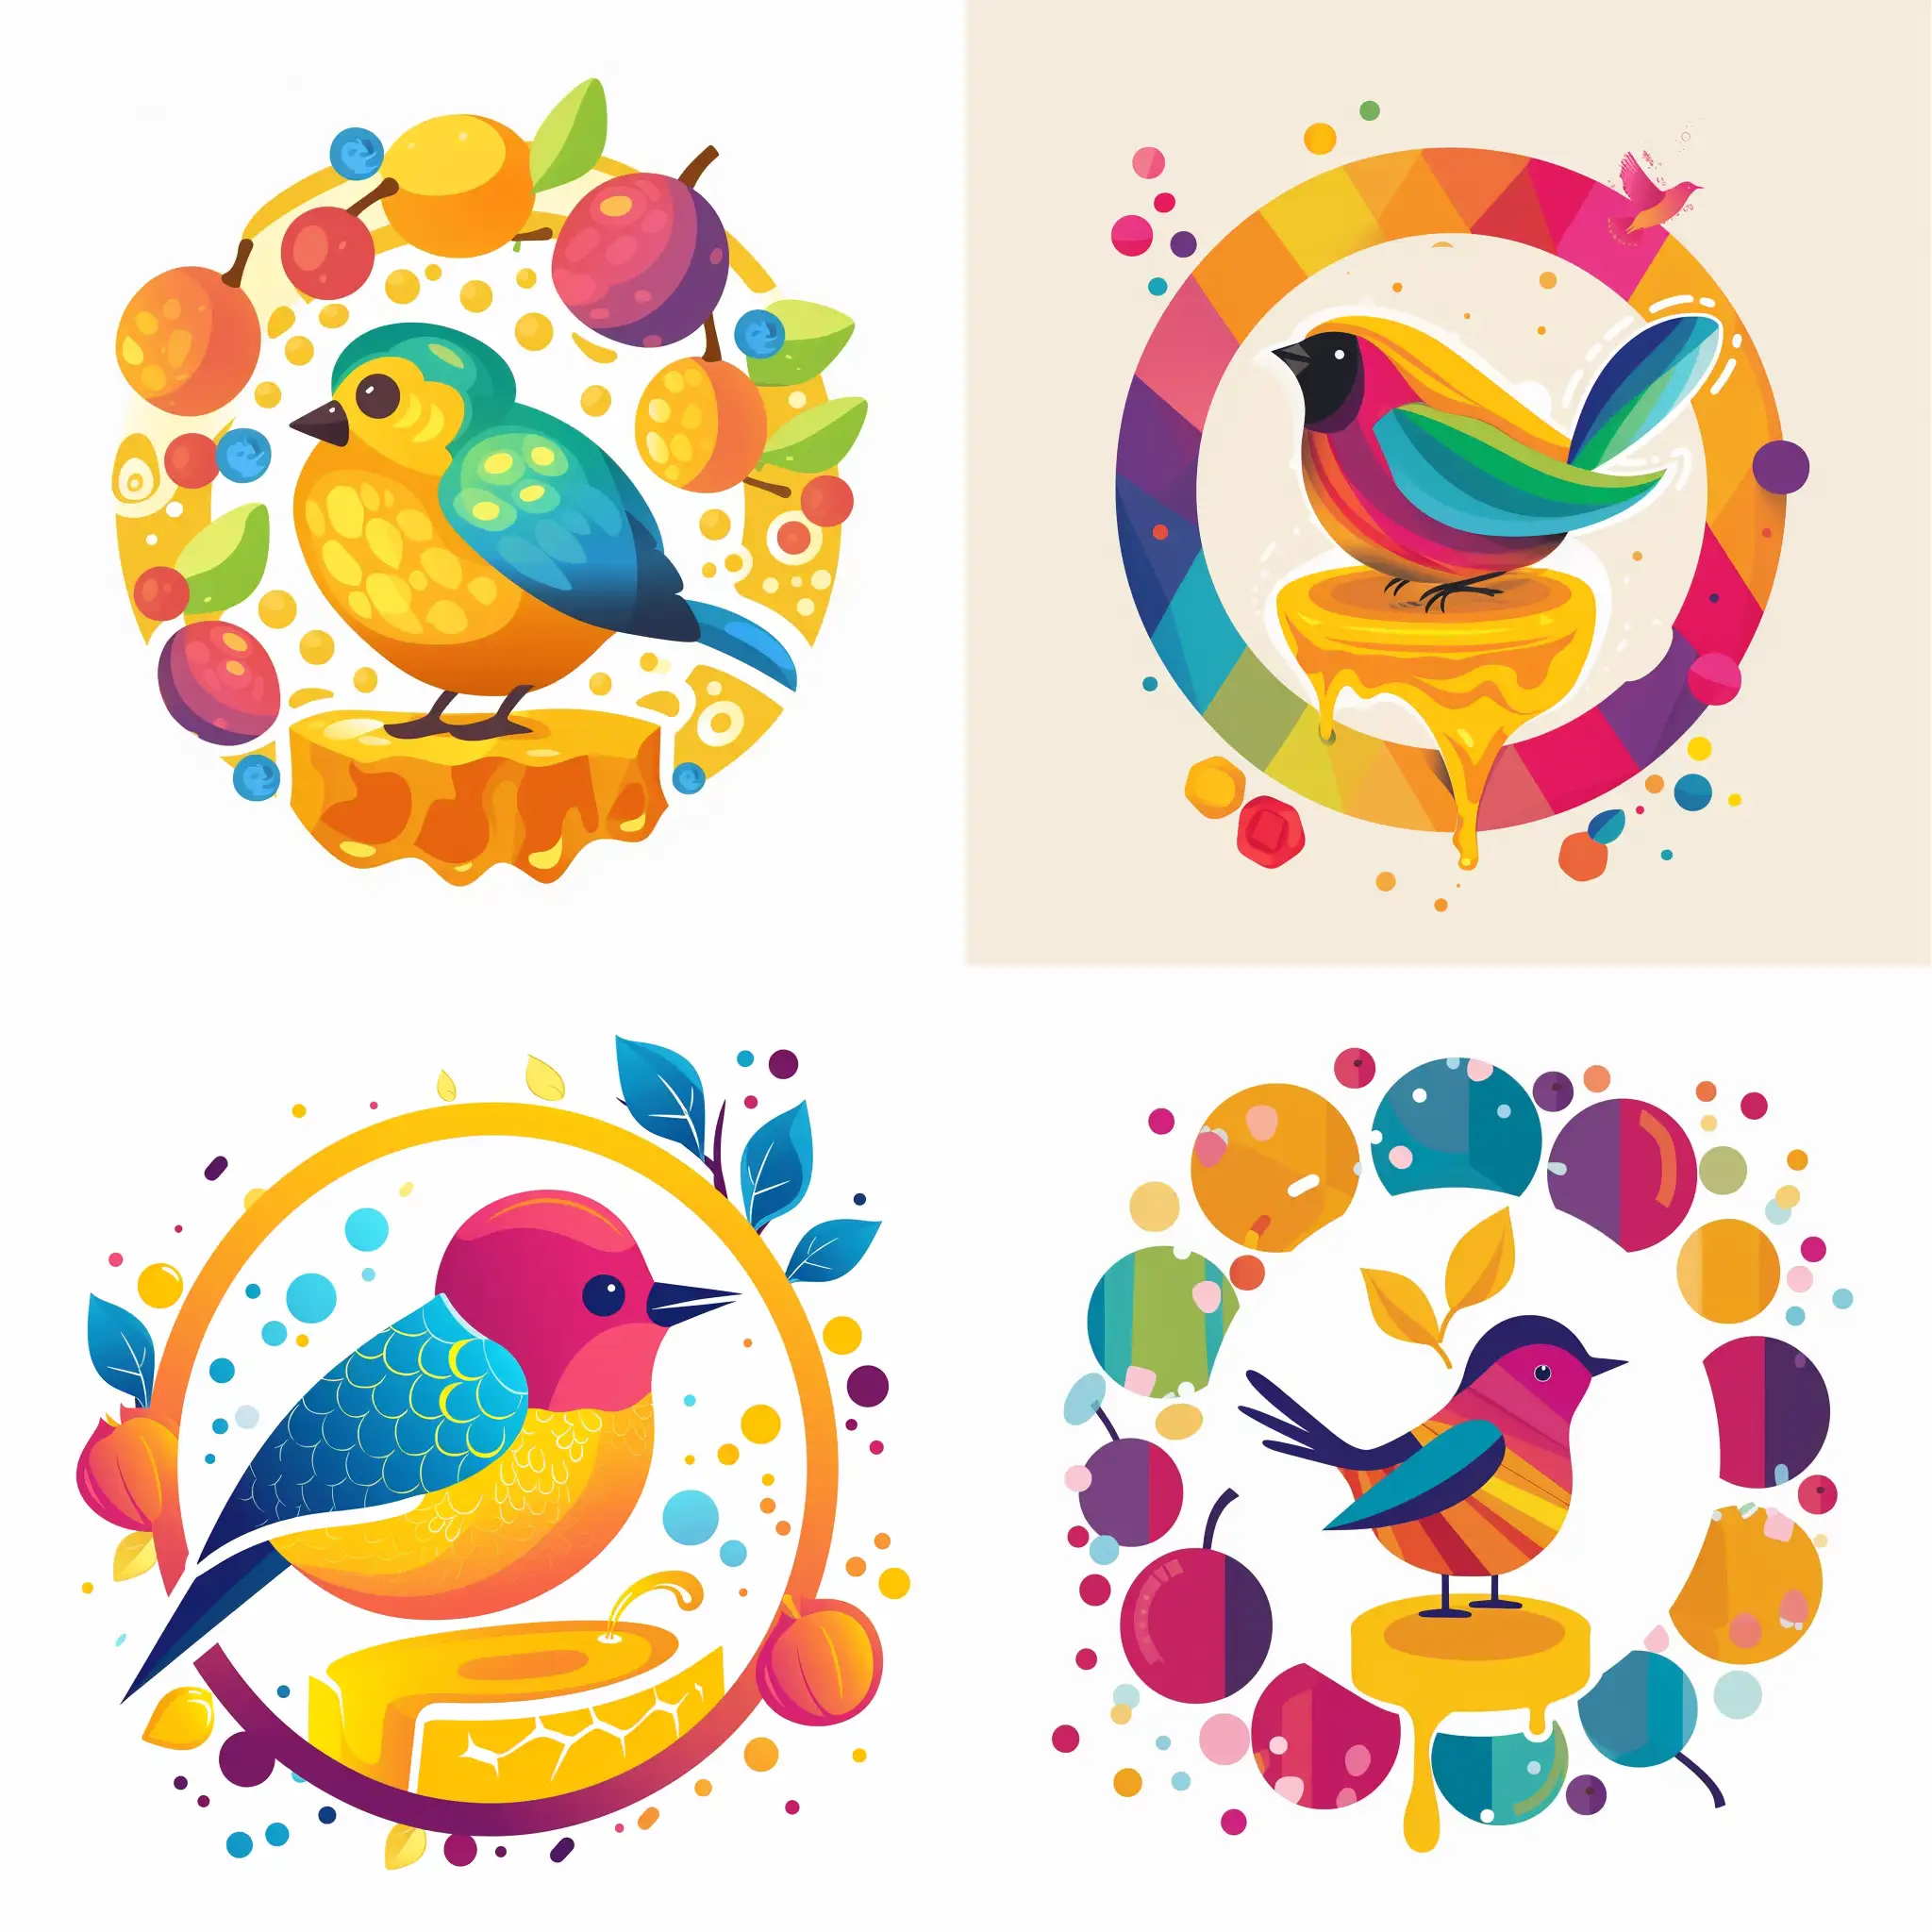 A very colorful circular logo about honey and olives and a colorful and happy bird